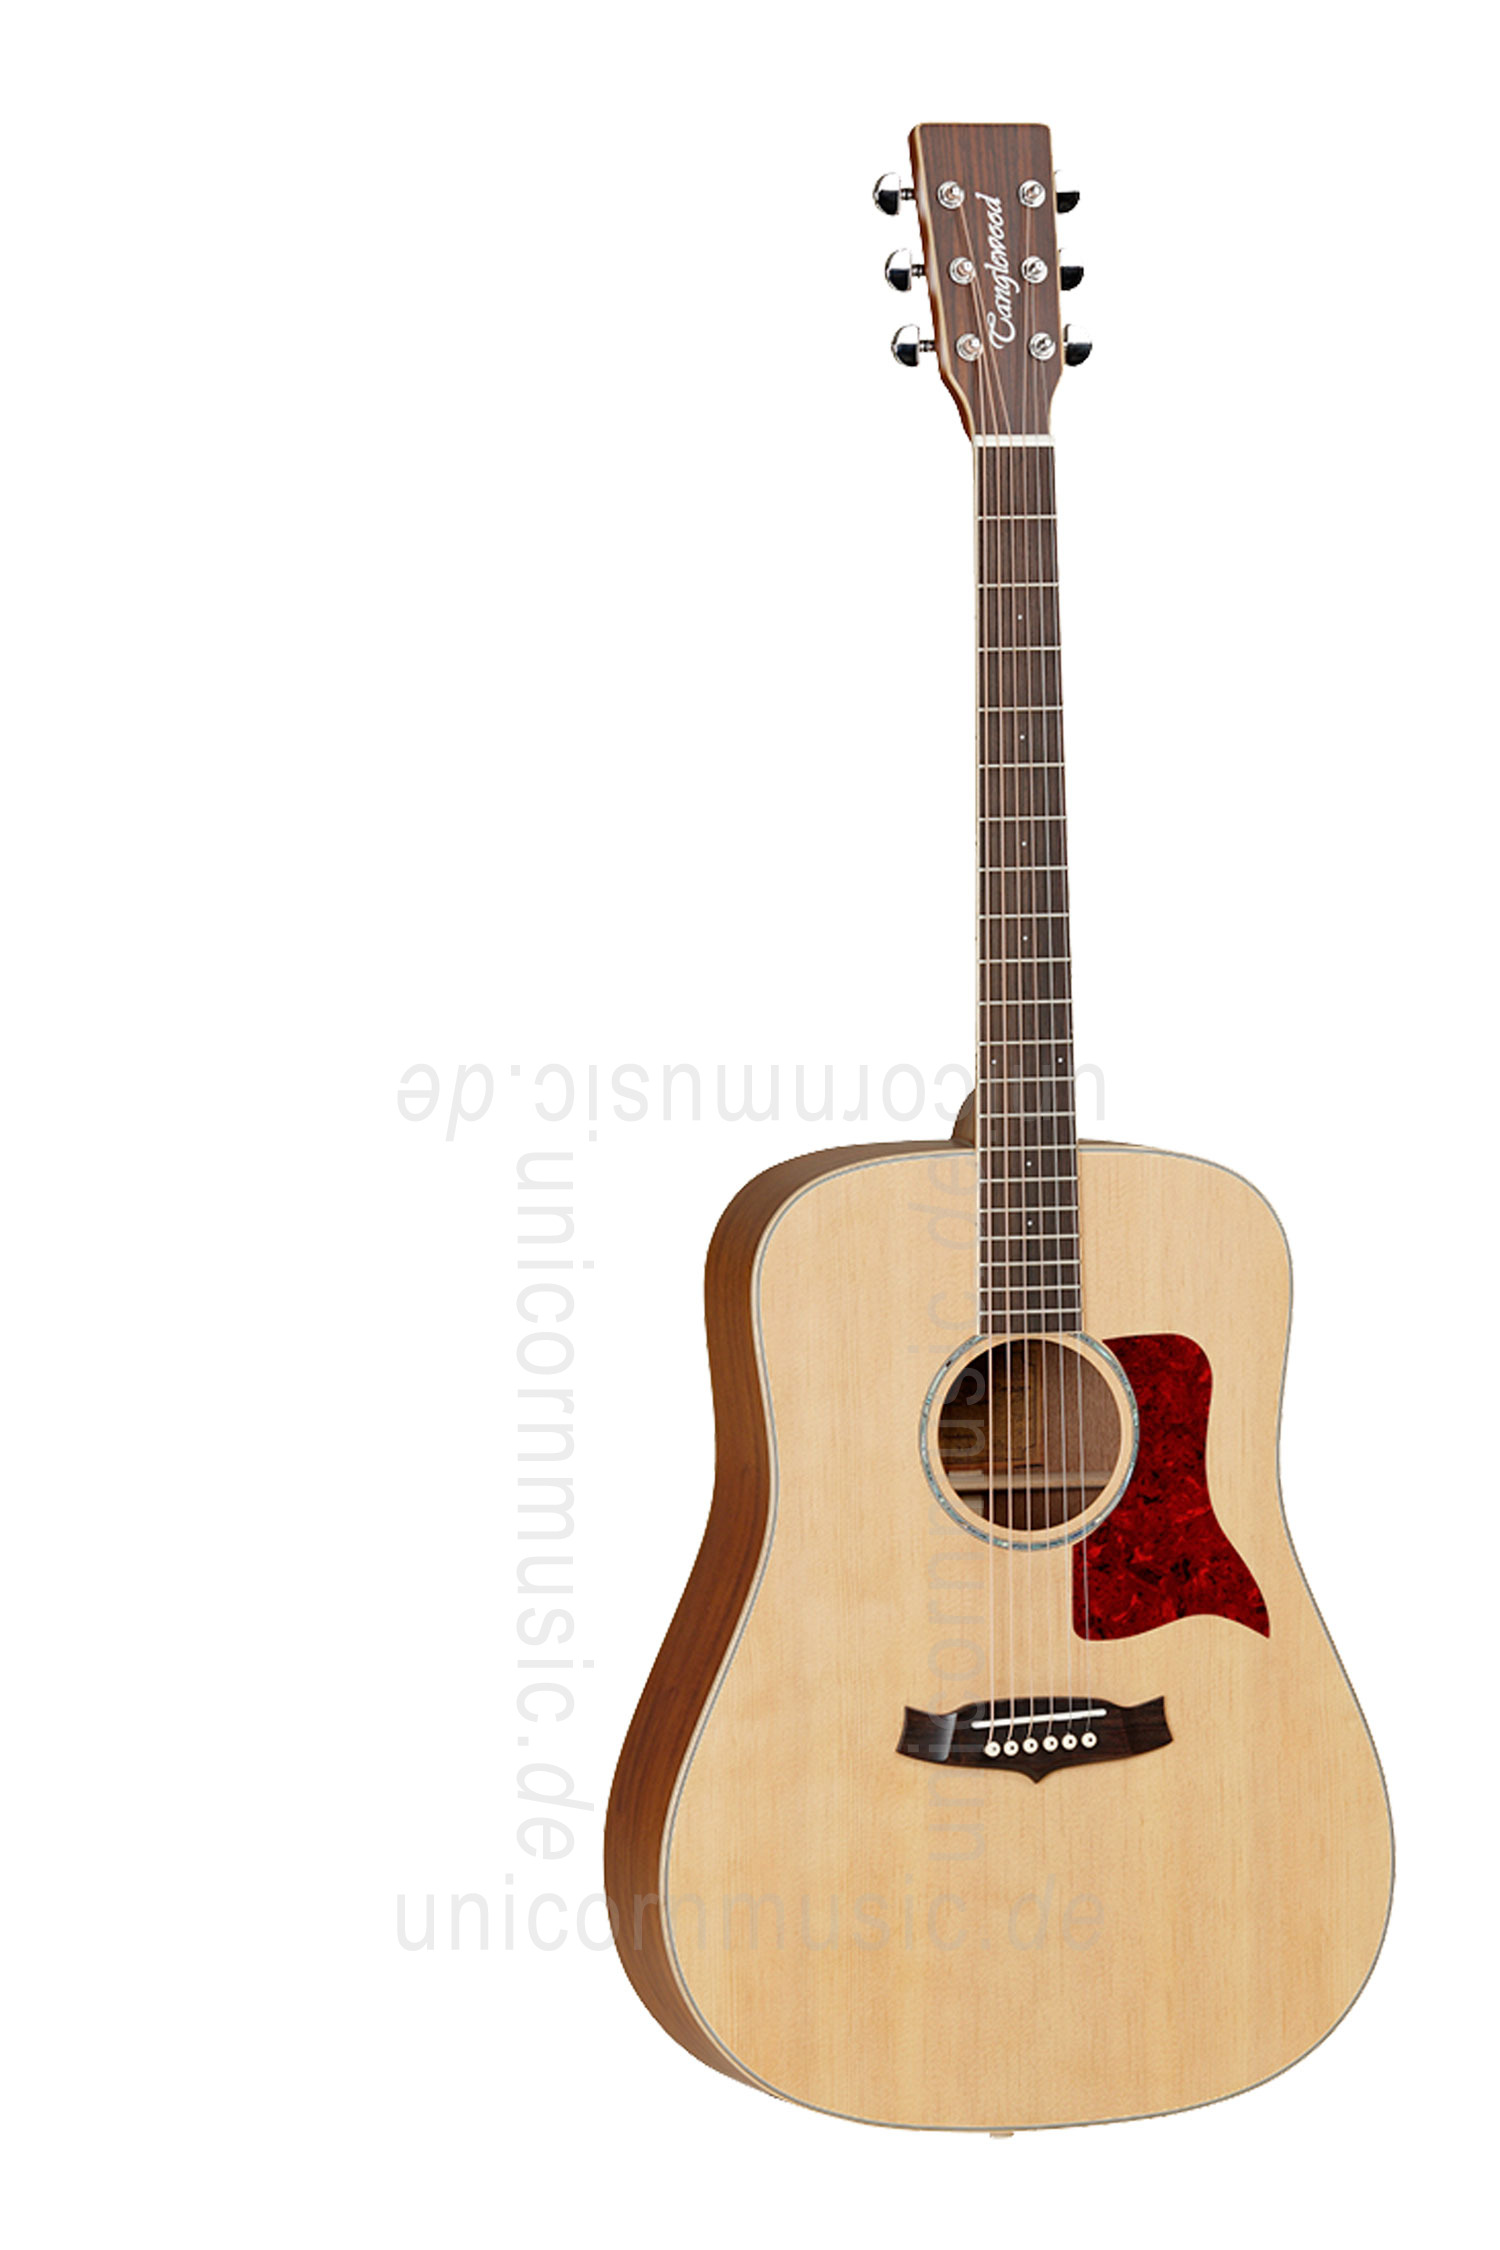 to article description / price Acoustic Guitar TANGLEWOOD X15 NS - Sundance Series - Dreadnought - all solid